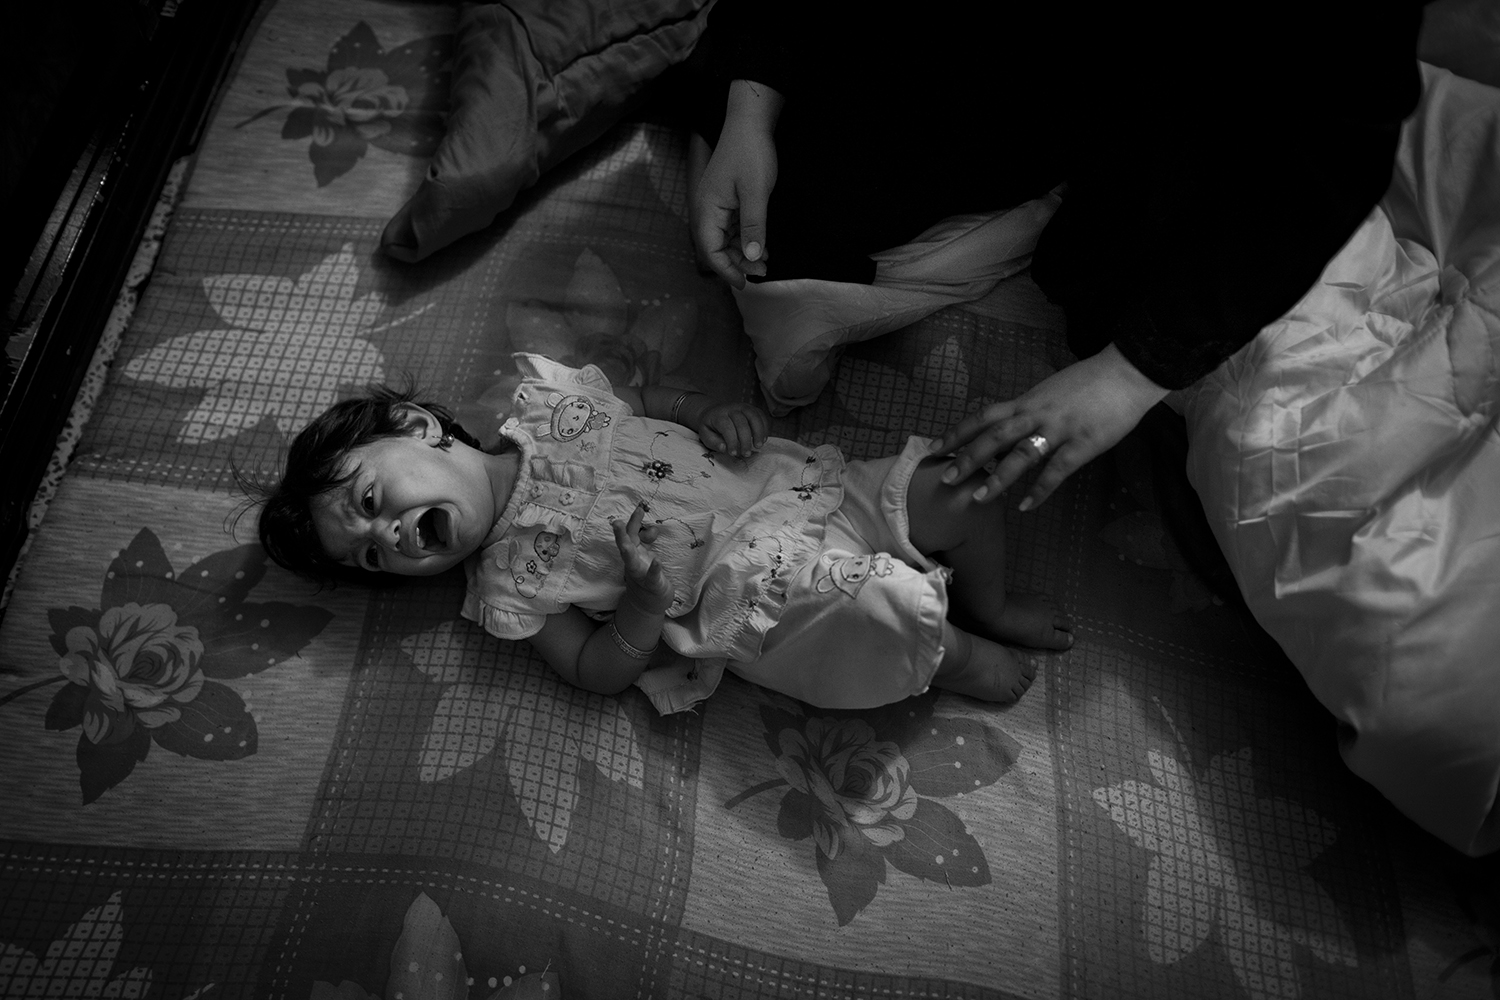 Apr. 24, 2012. Basra. An infant girl, who suffers from leukemia and two different length legs, lies on the floor in pain.